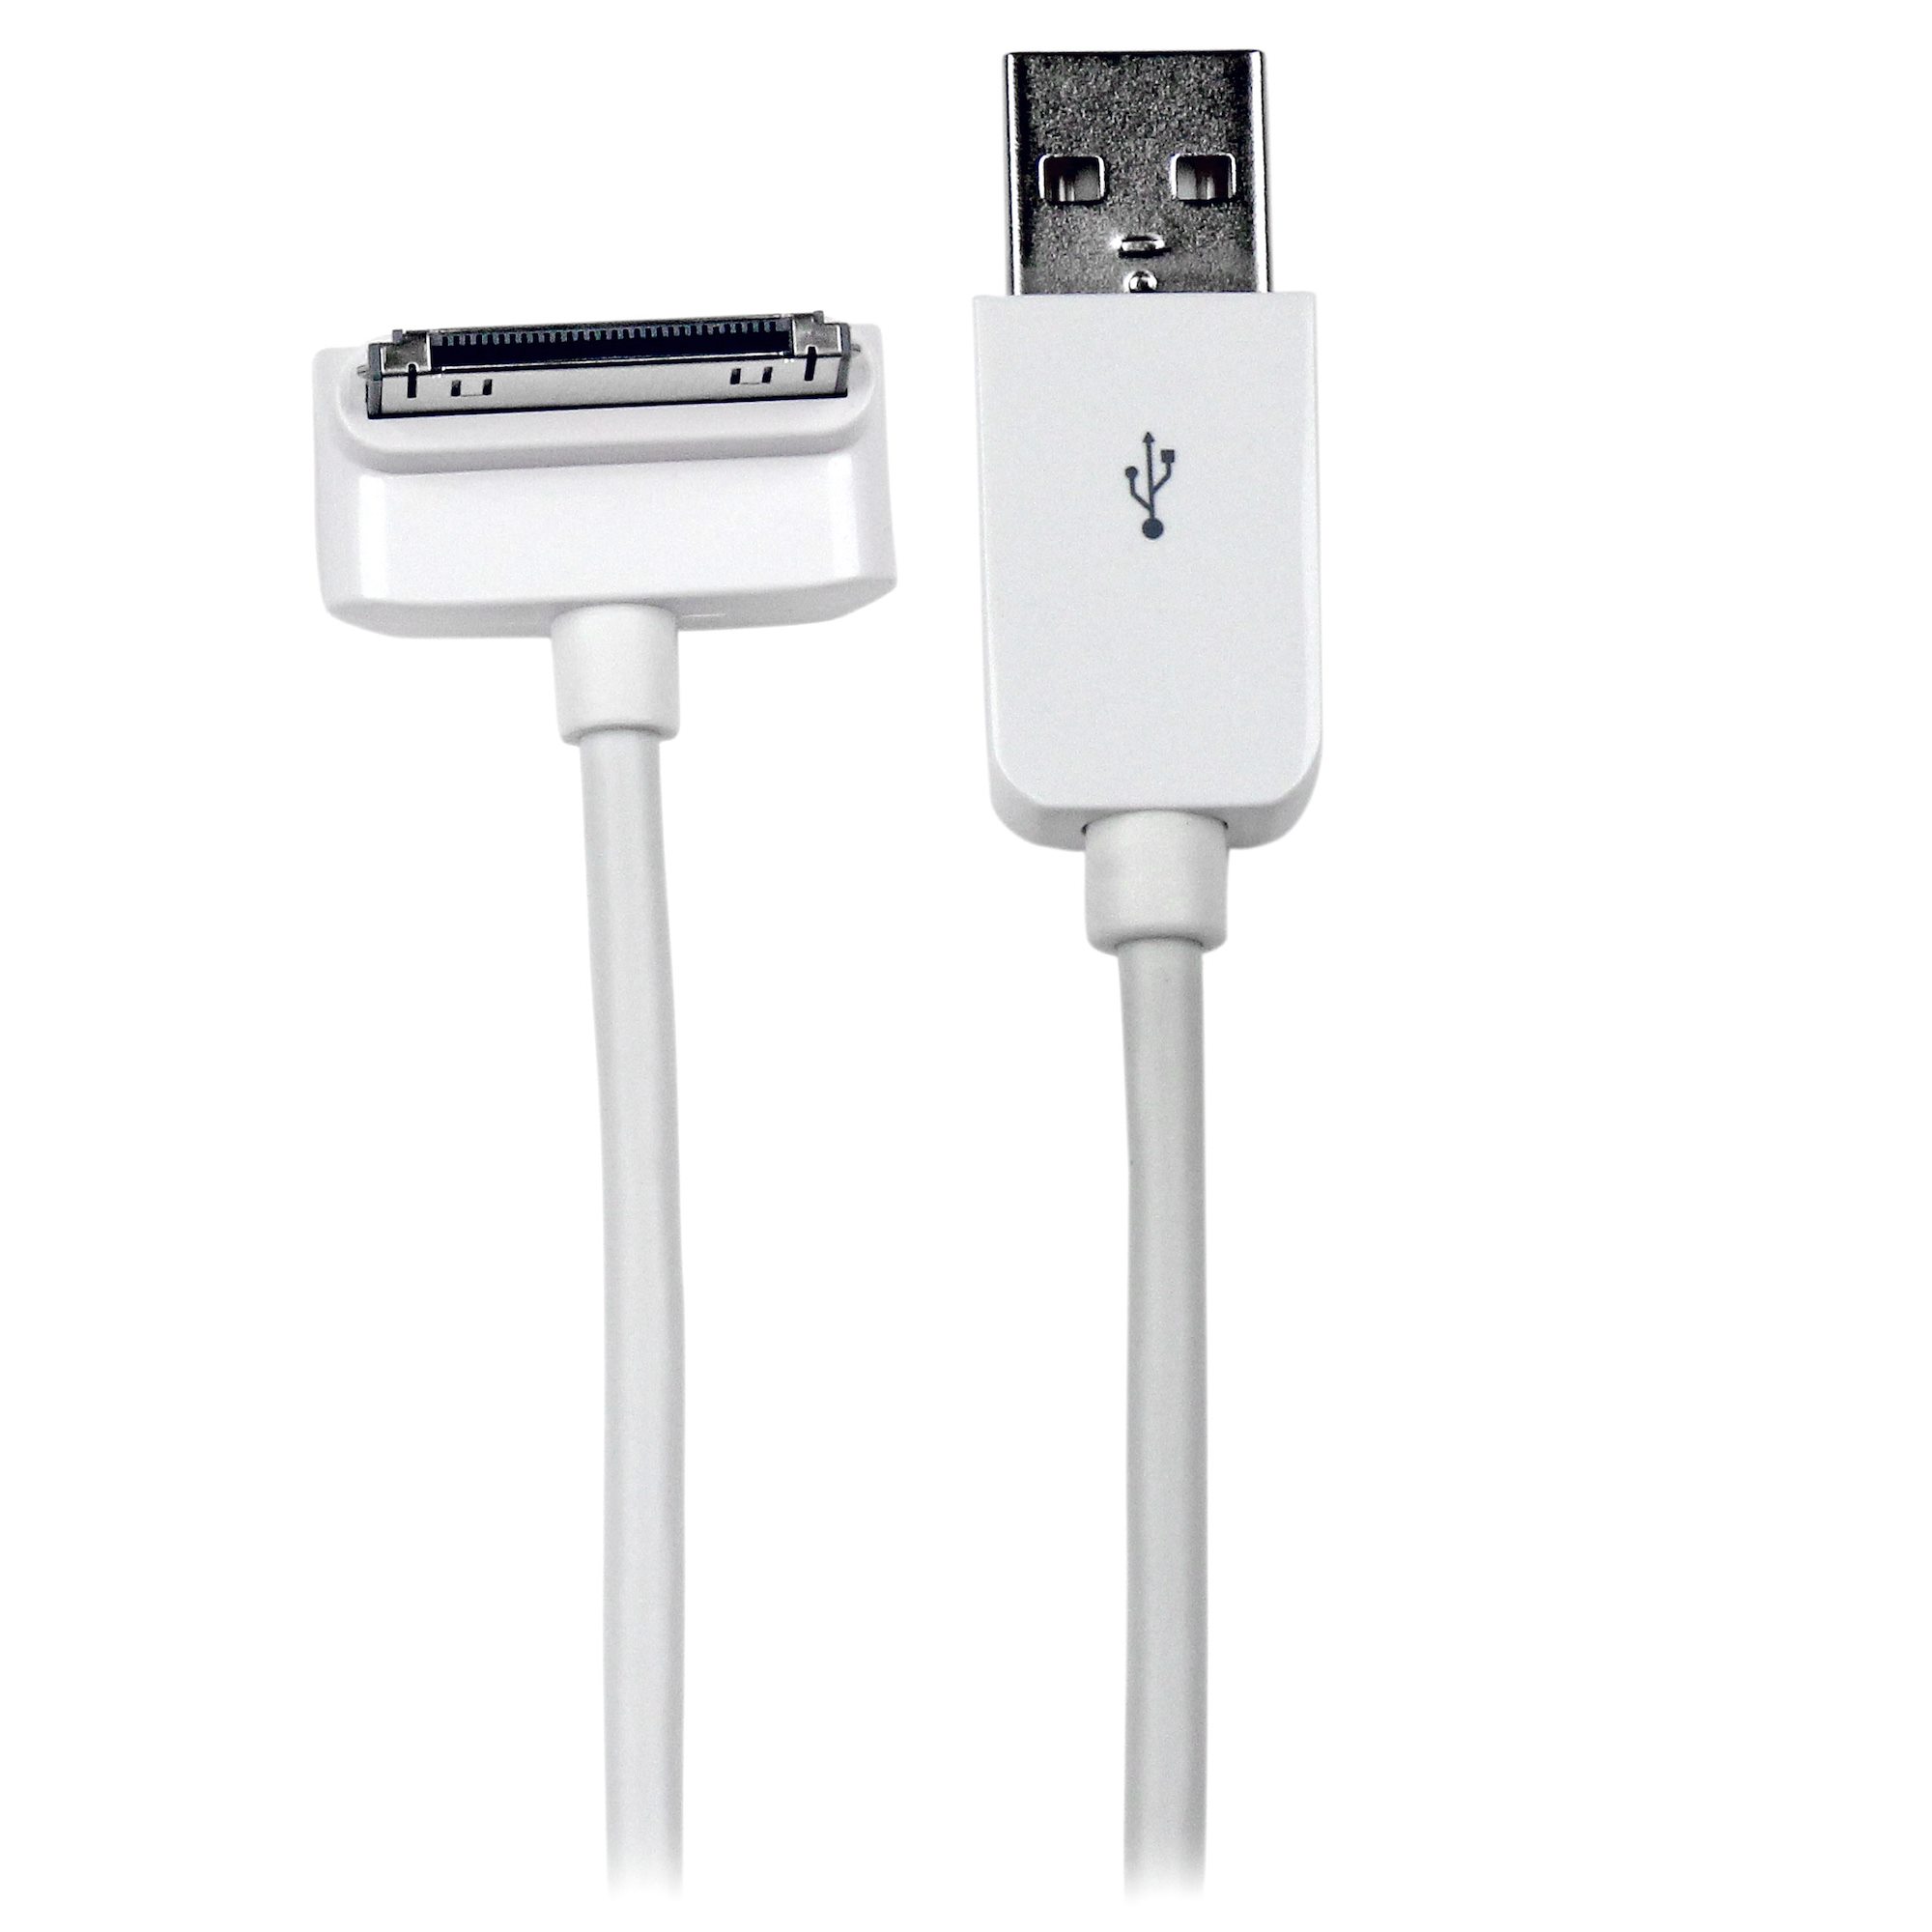 1m Apple® 30 Pin Dock To Usb Cable Cables Usb Con Conector Dock Para Iphone Ipod Ipad Europa